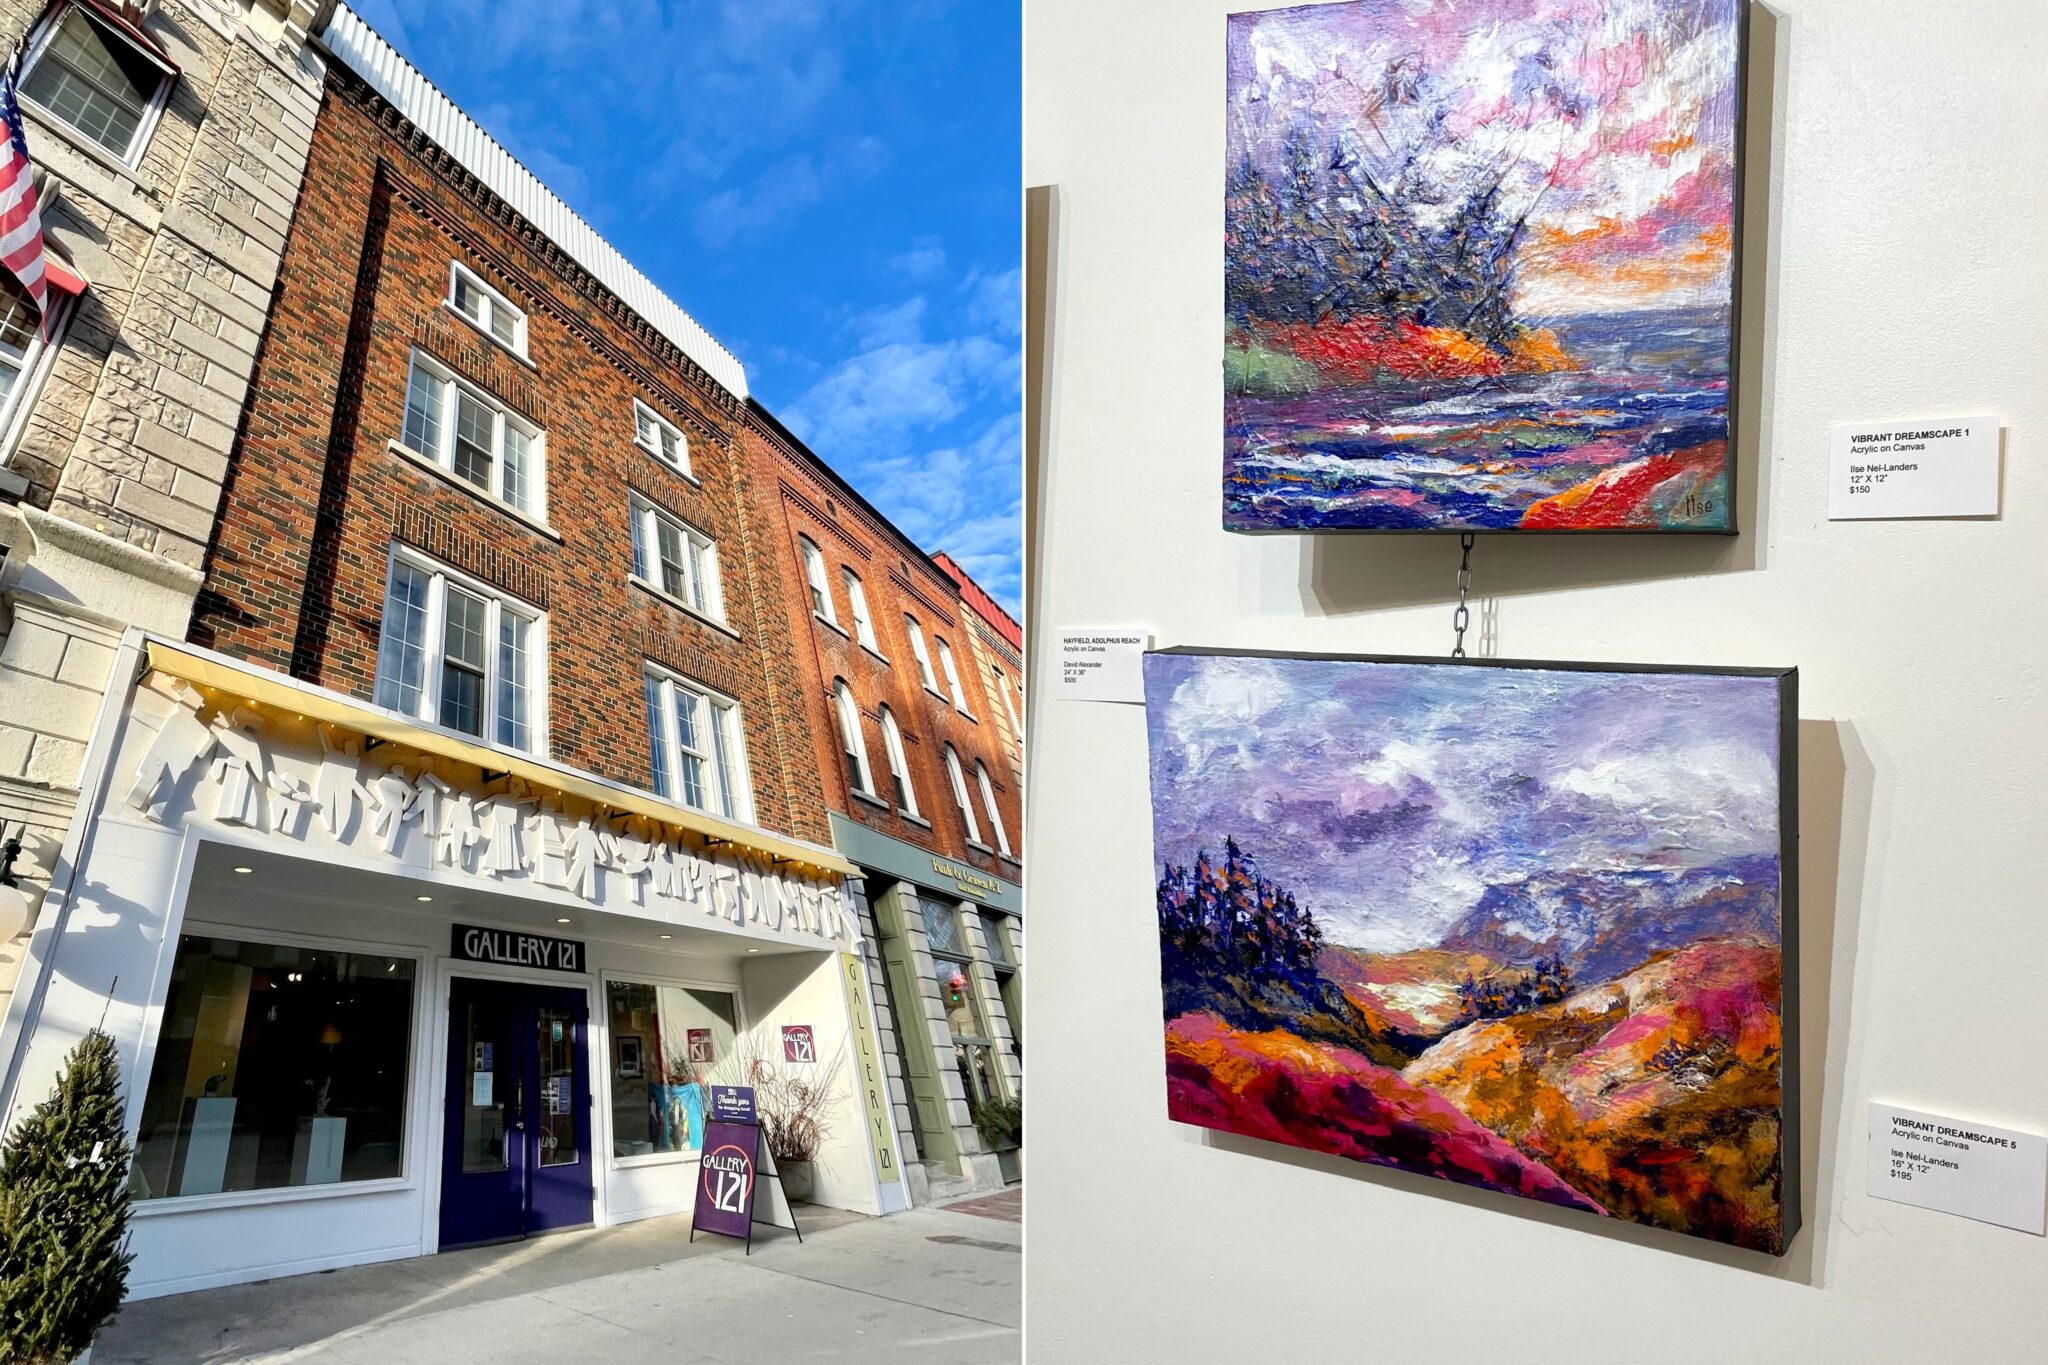 the exterior facade of an art gallery next to a photo of some paintings hanging on a wall